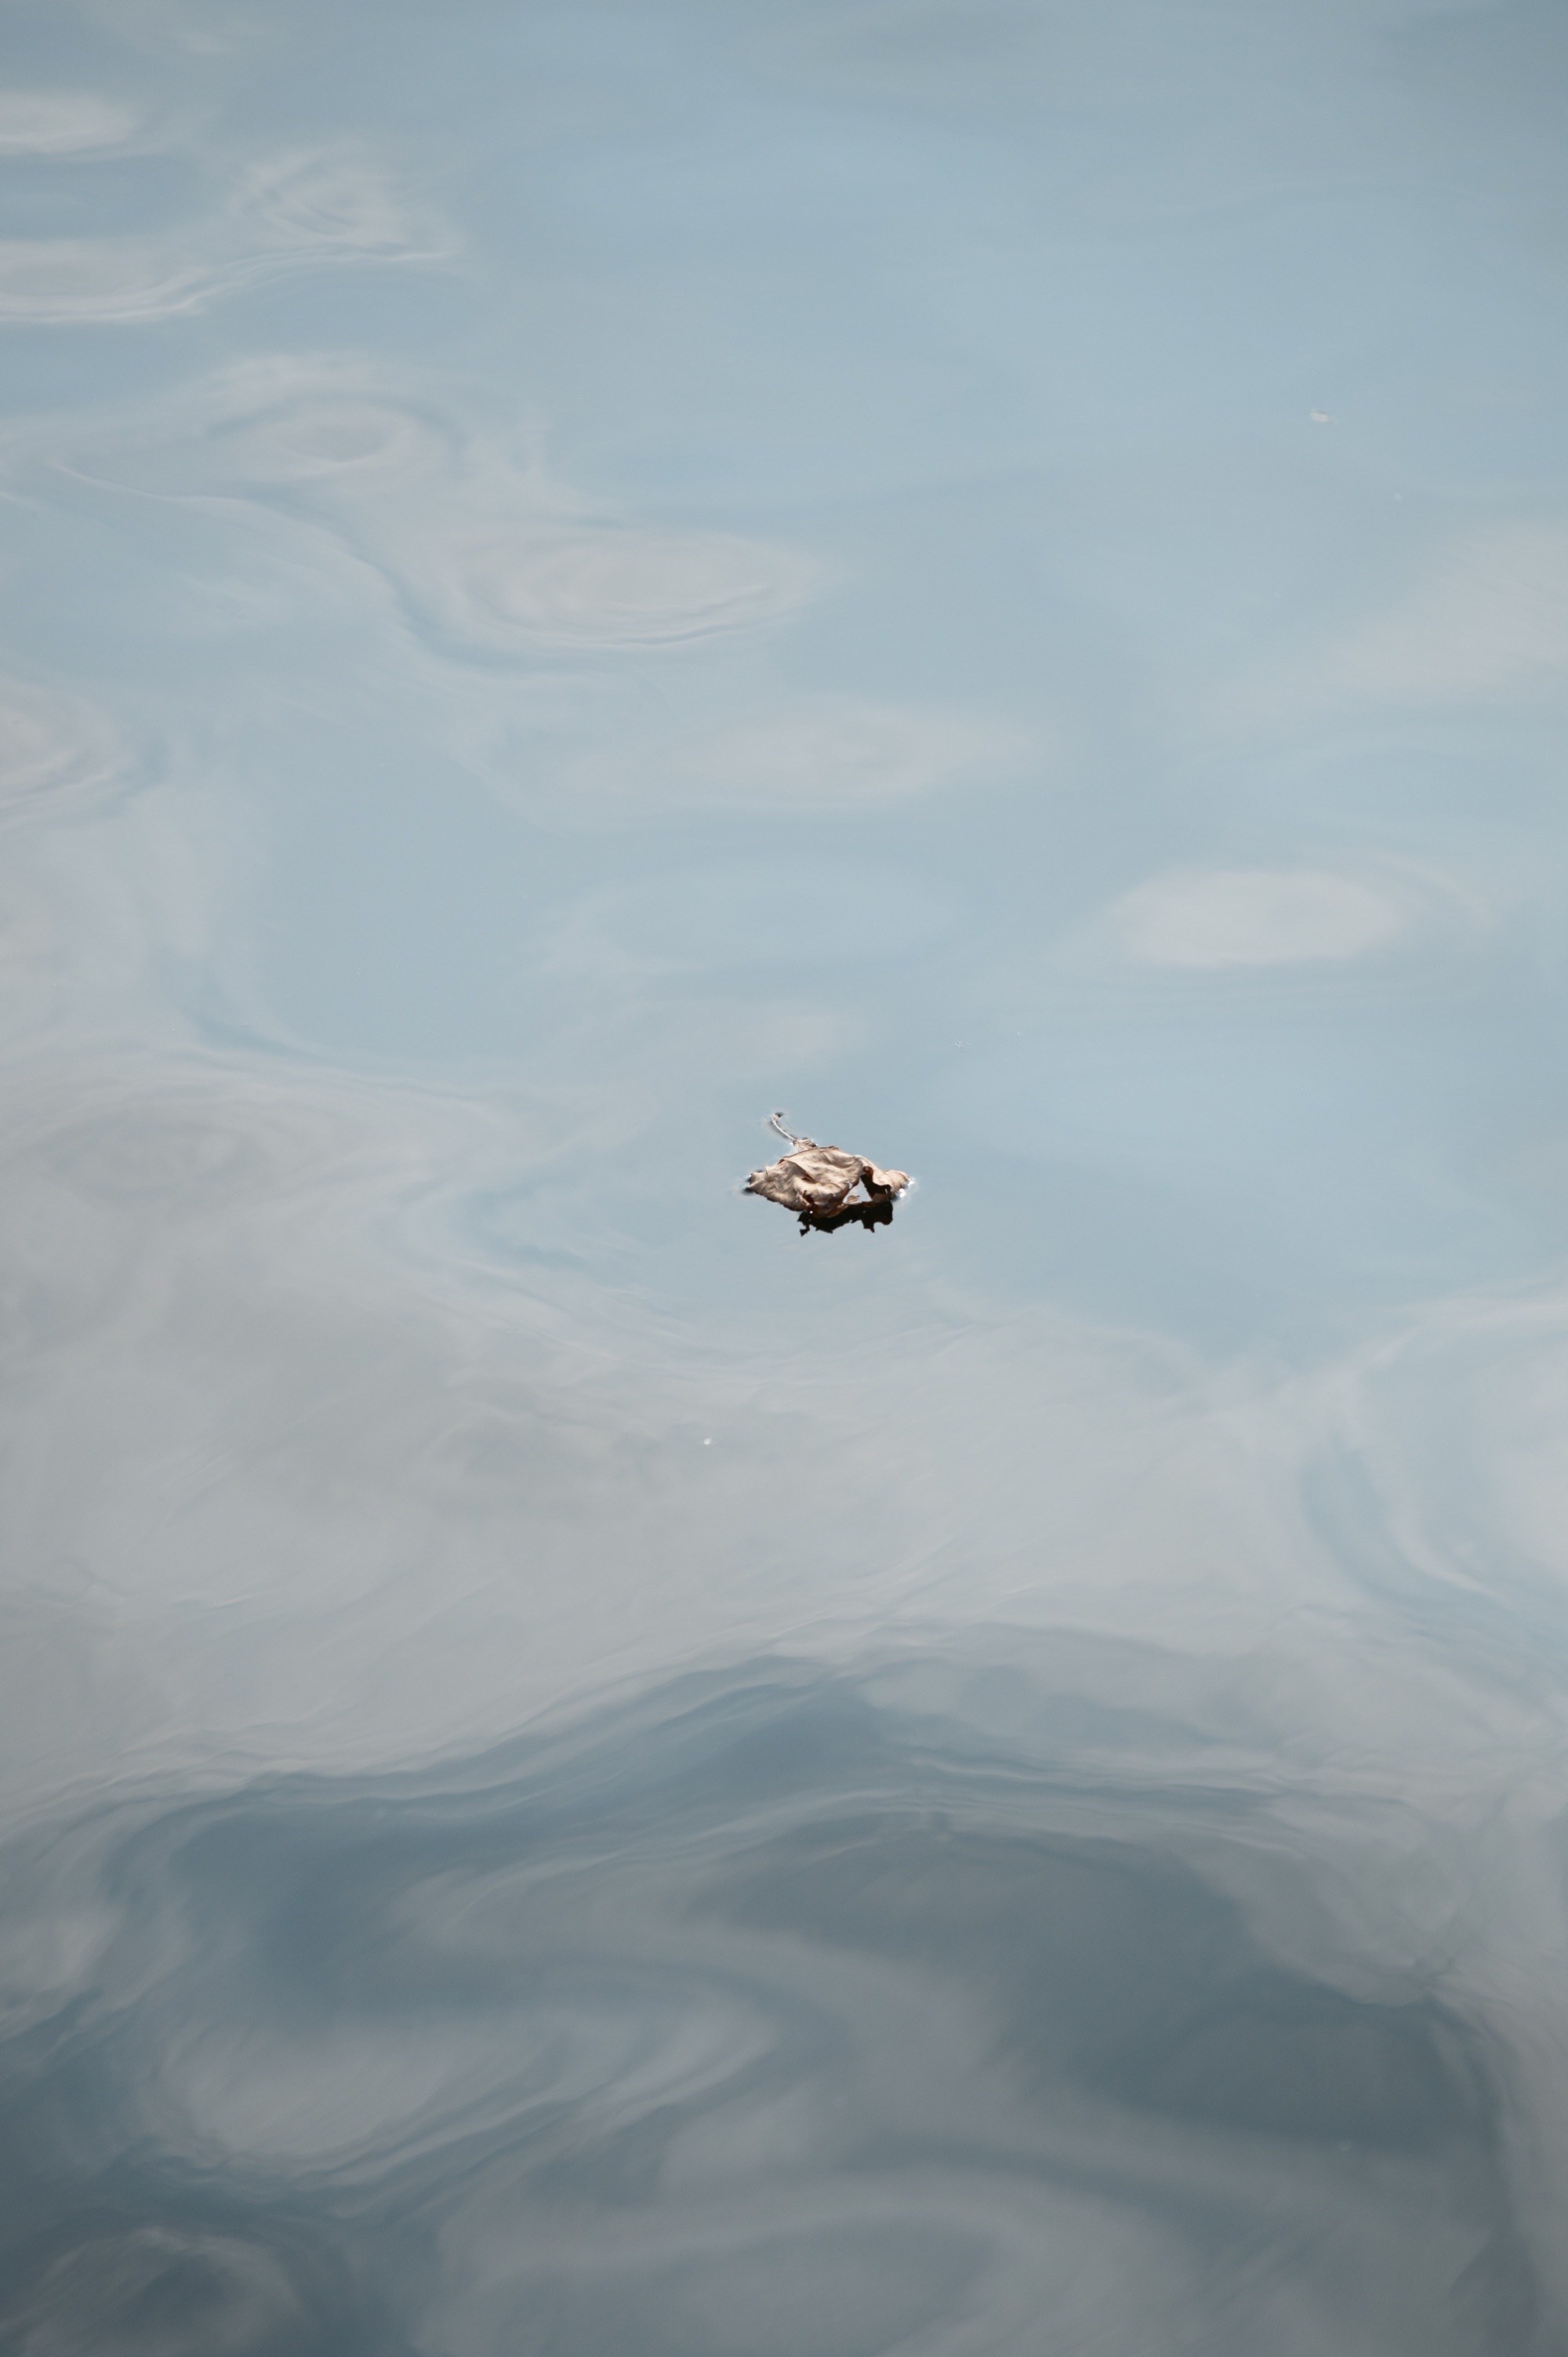 A lone leaf on the water